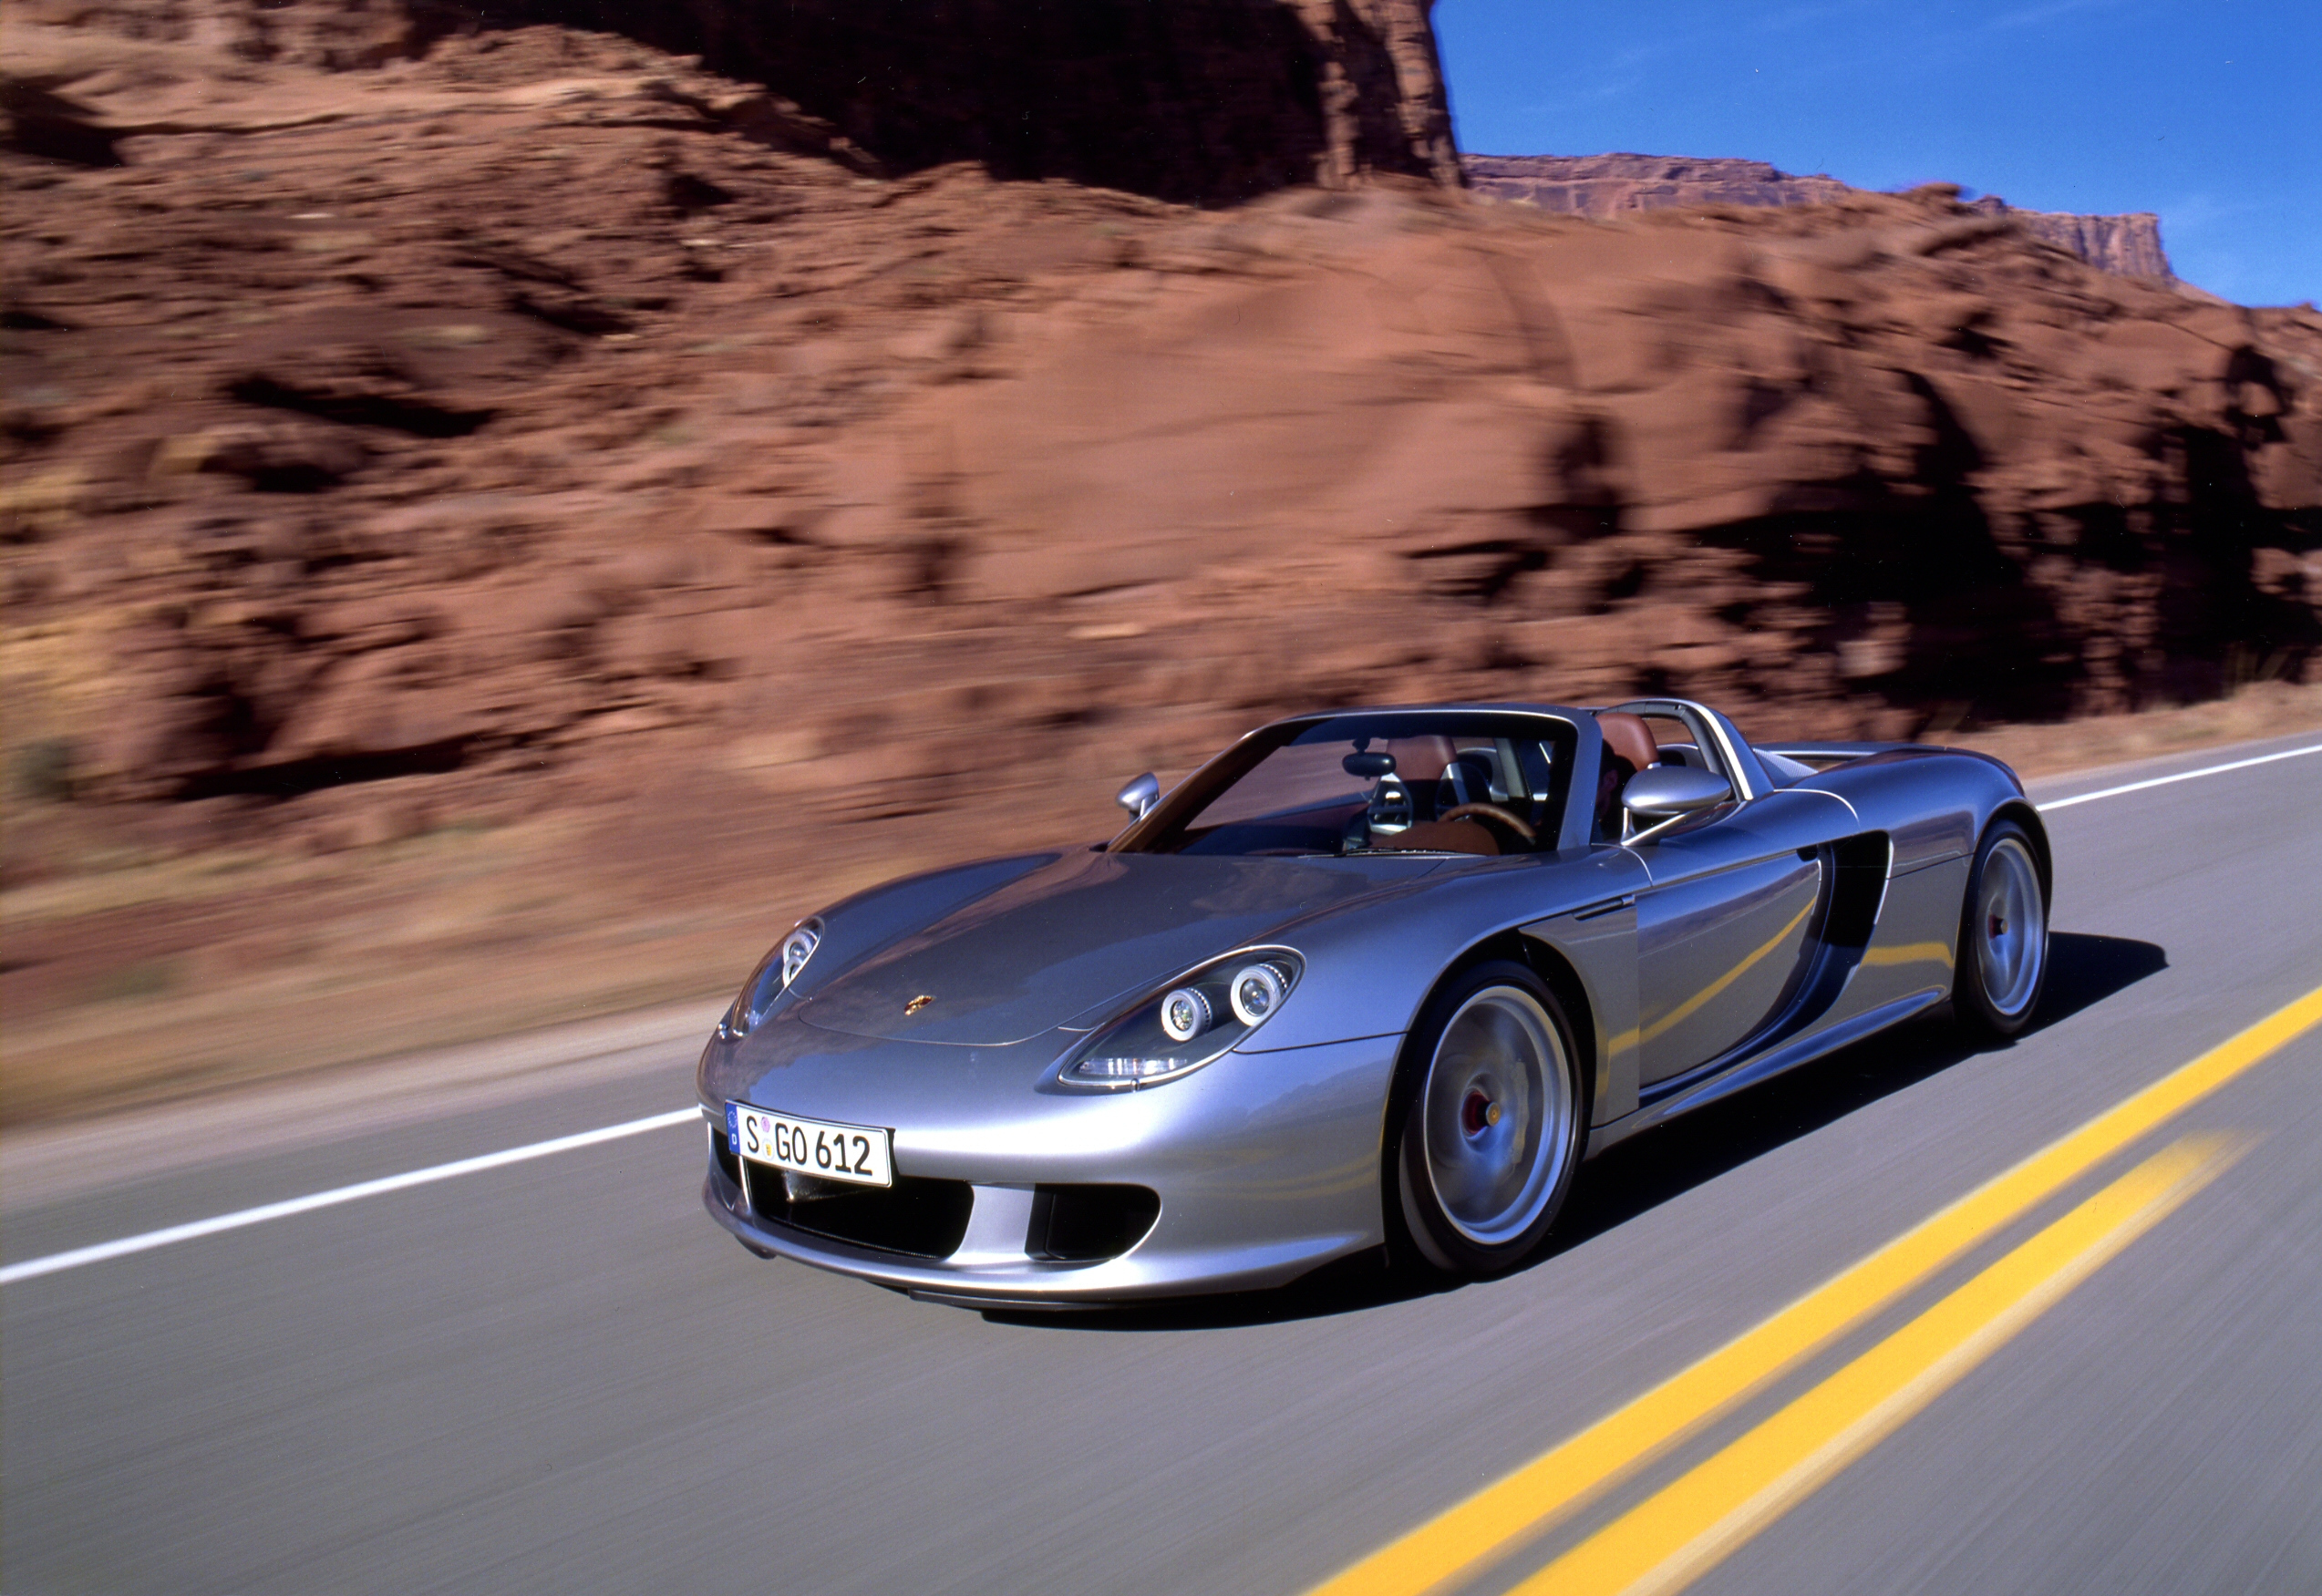 The Carrera GT was one of Porsche's most high-tech cars at the time